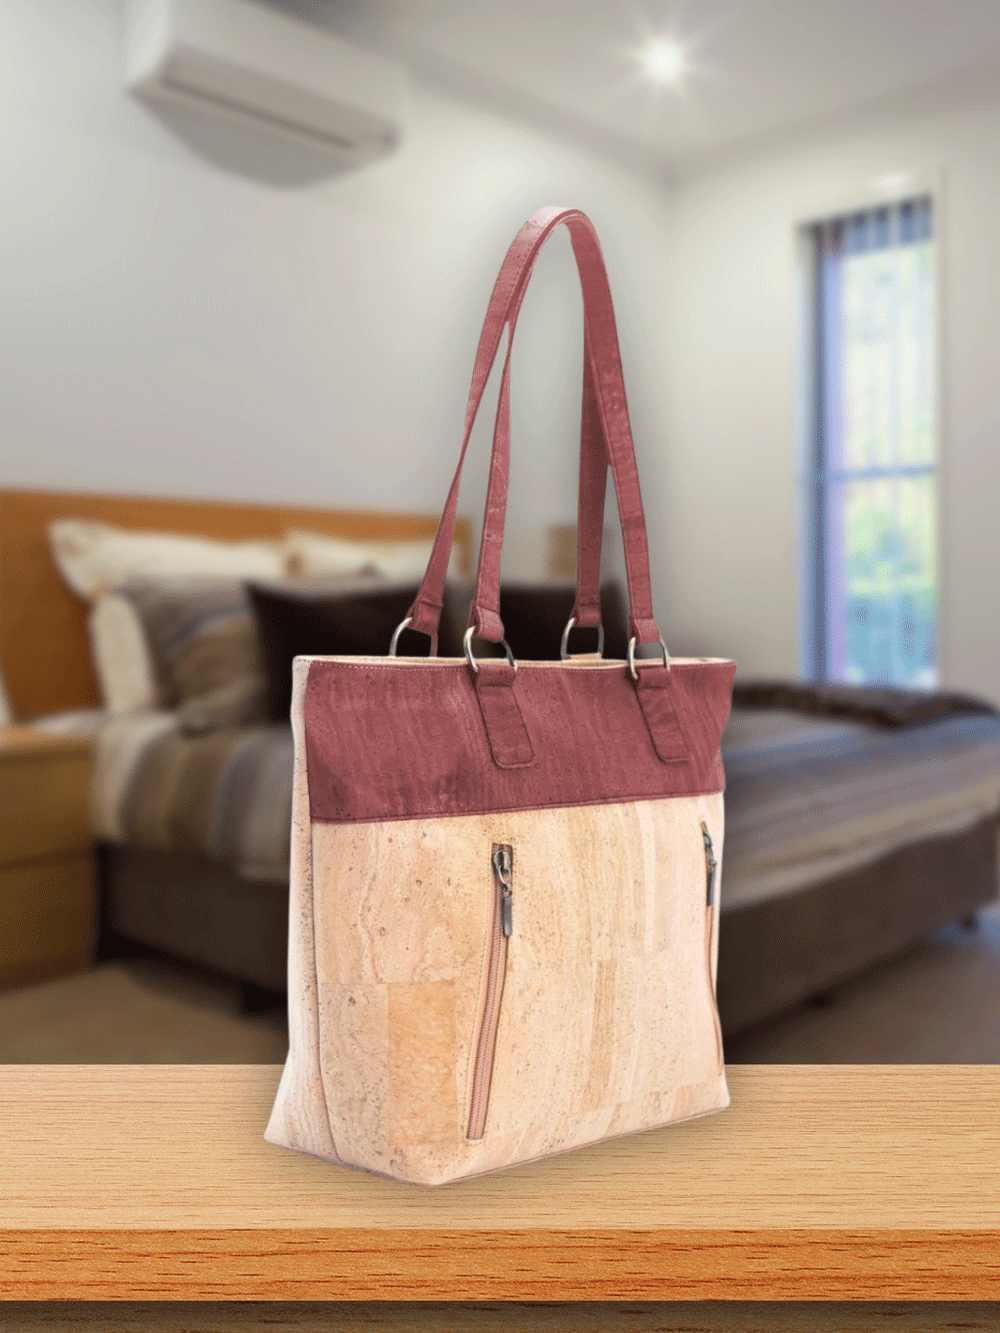 Vegan Cork Handbags, Wallets and Purses Made in Portugal – We Are Portugal